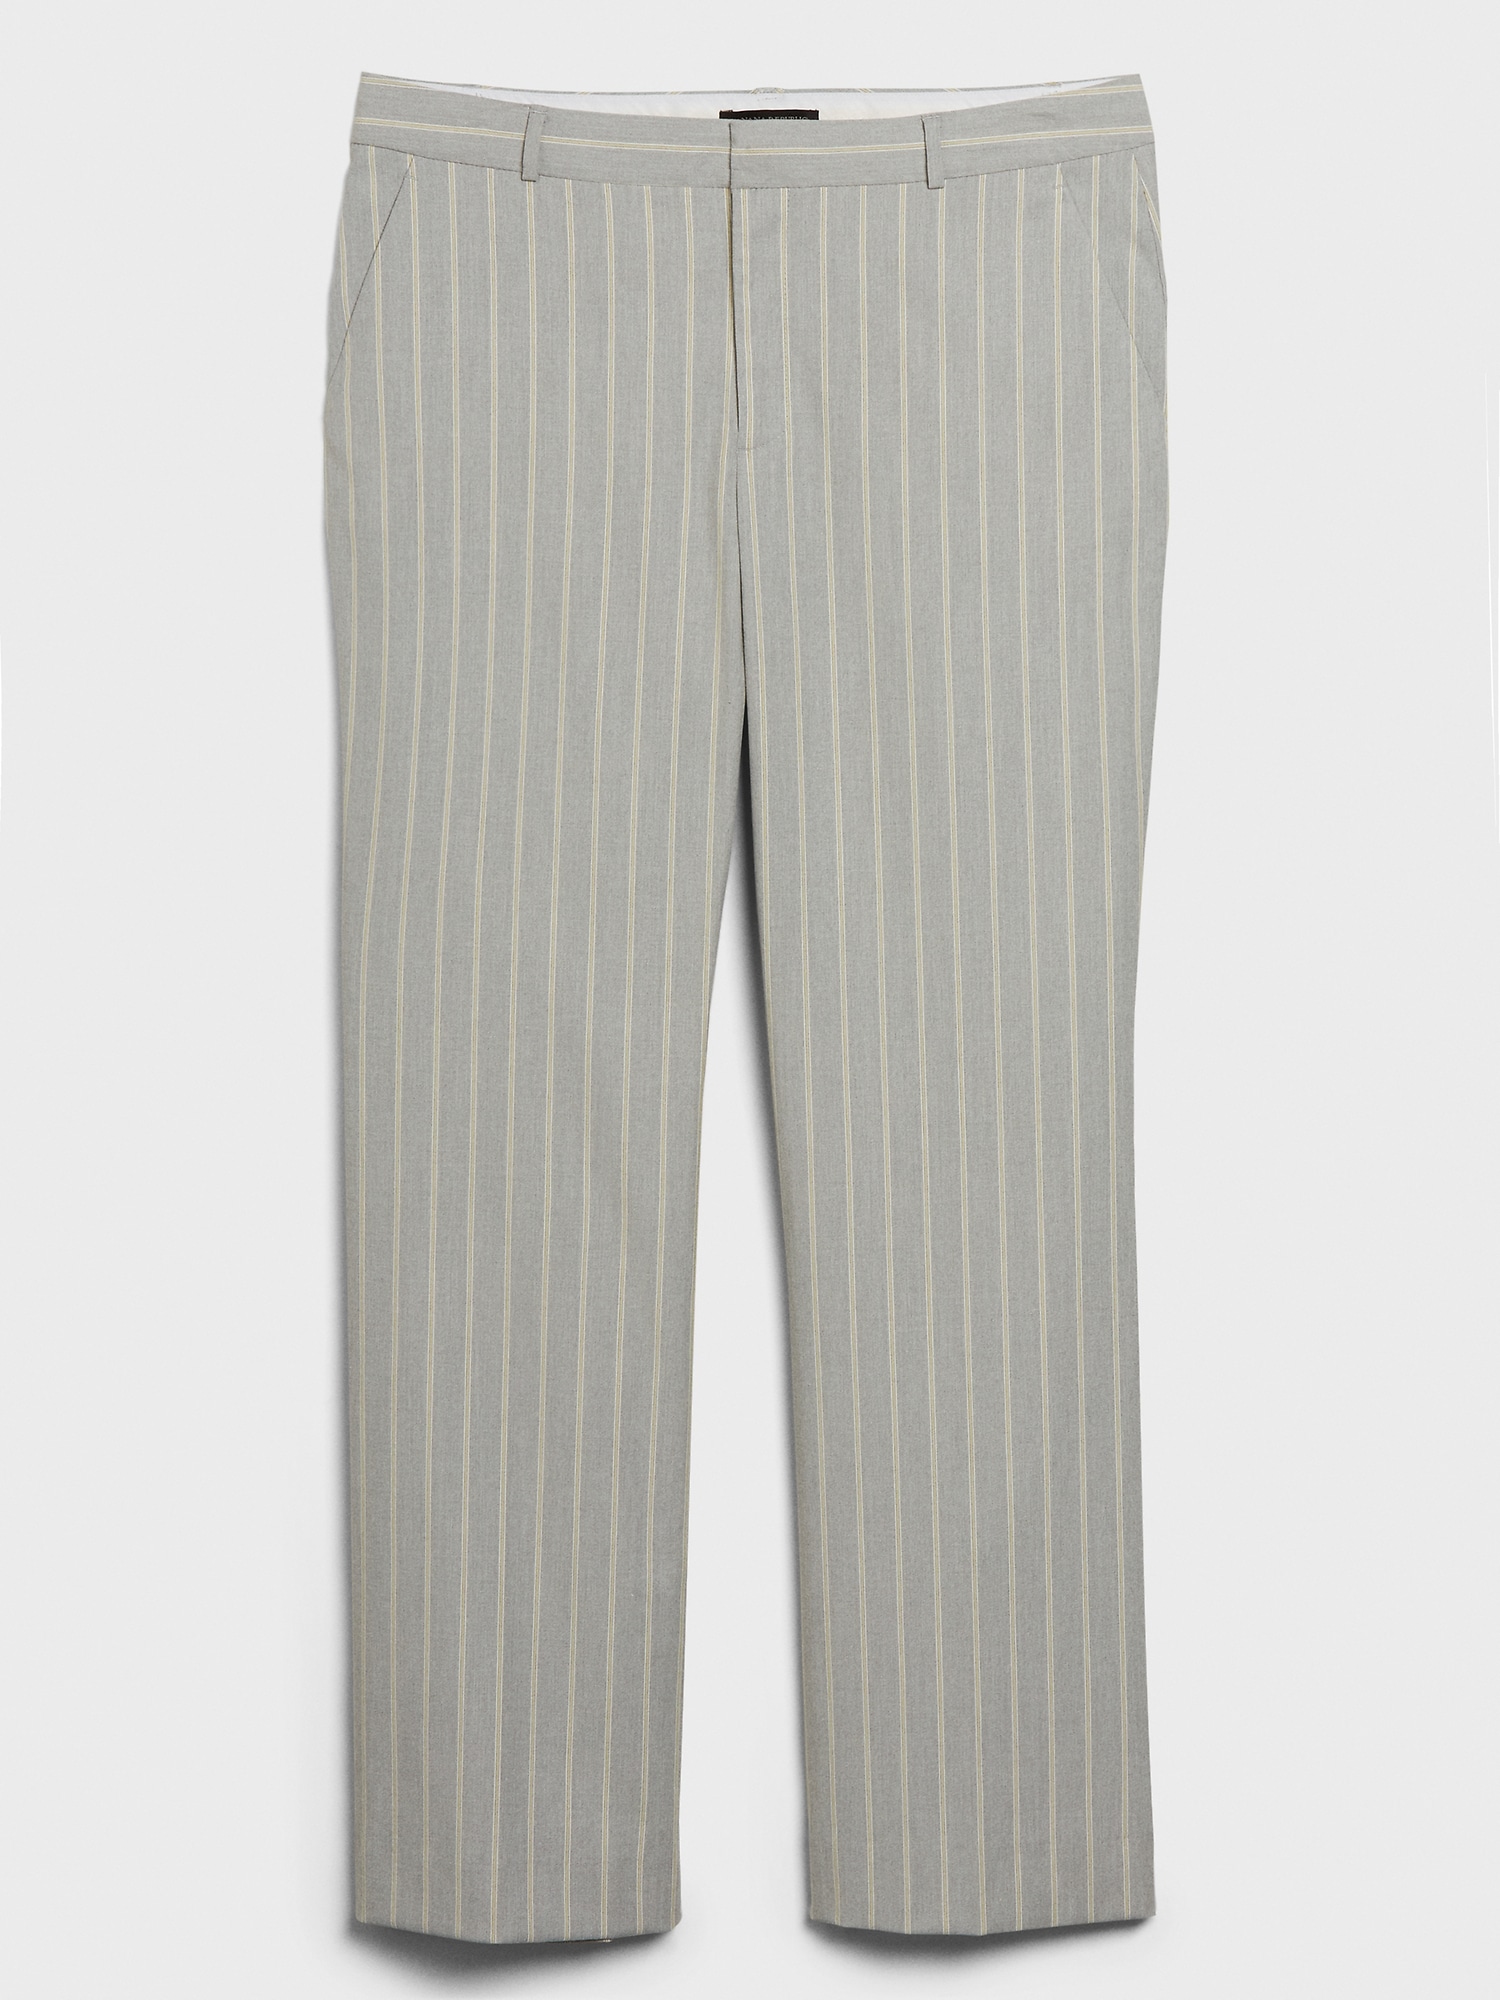 Washable Curvy Logan Striped Tailored Trouser